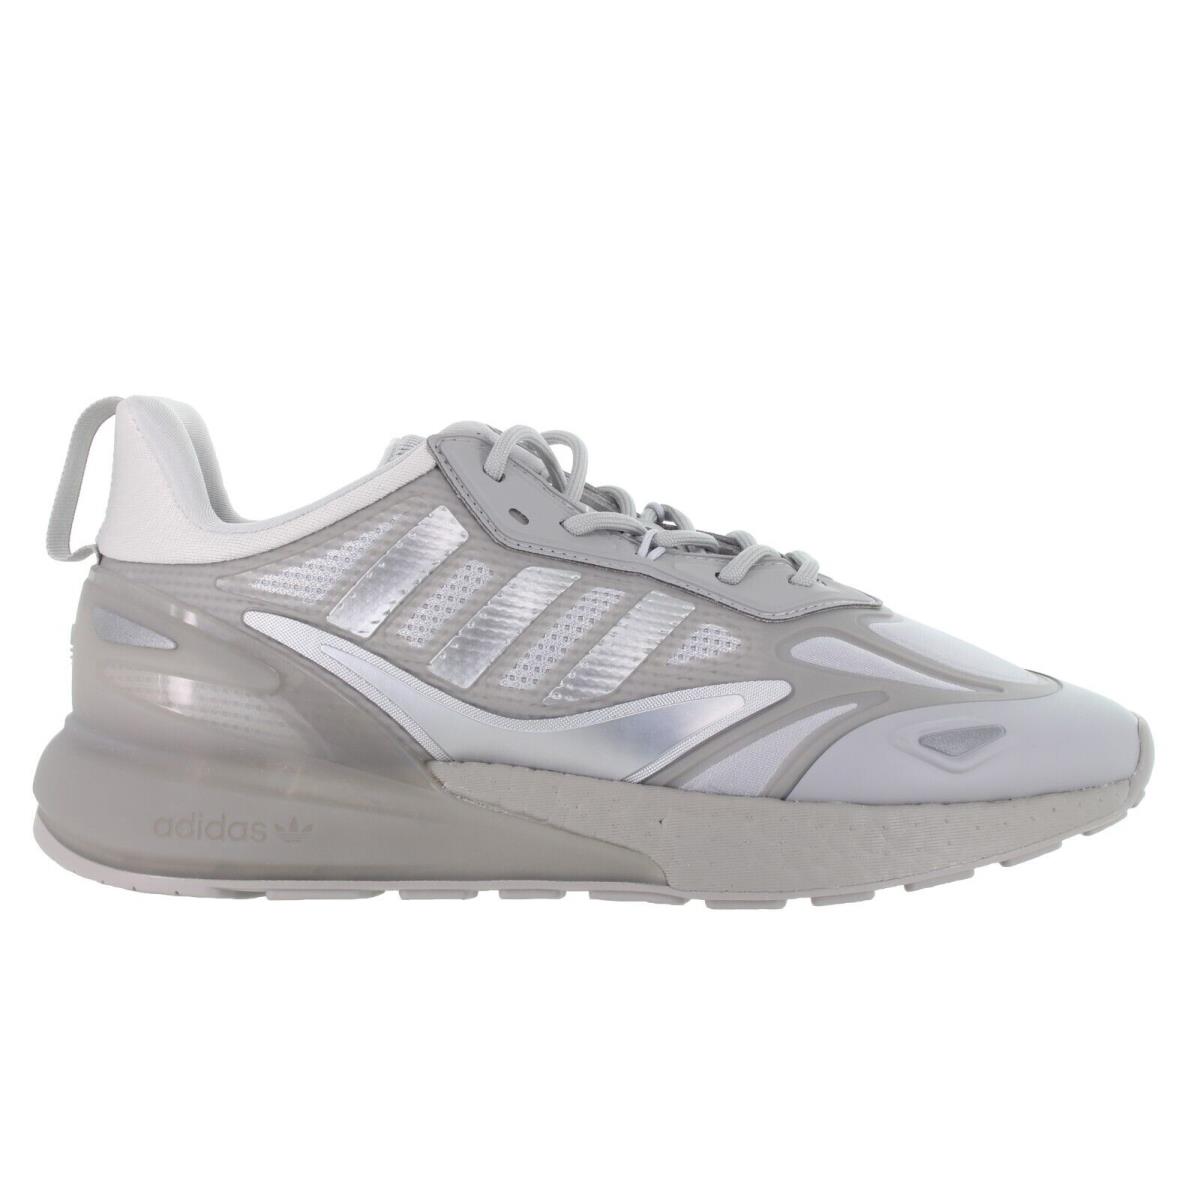 Adidas Men`s Originals ZX 2K Boost 2.0 Grey Training Shoes Size 8 - Grey Two, Matte Silver